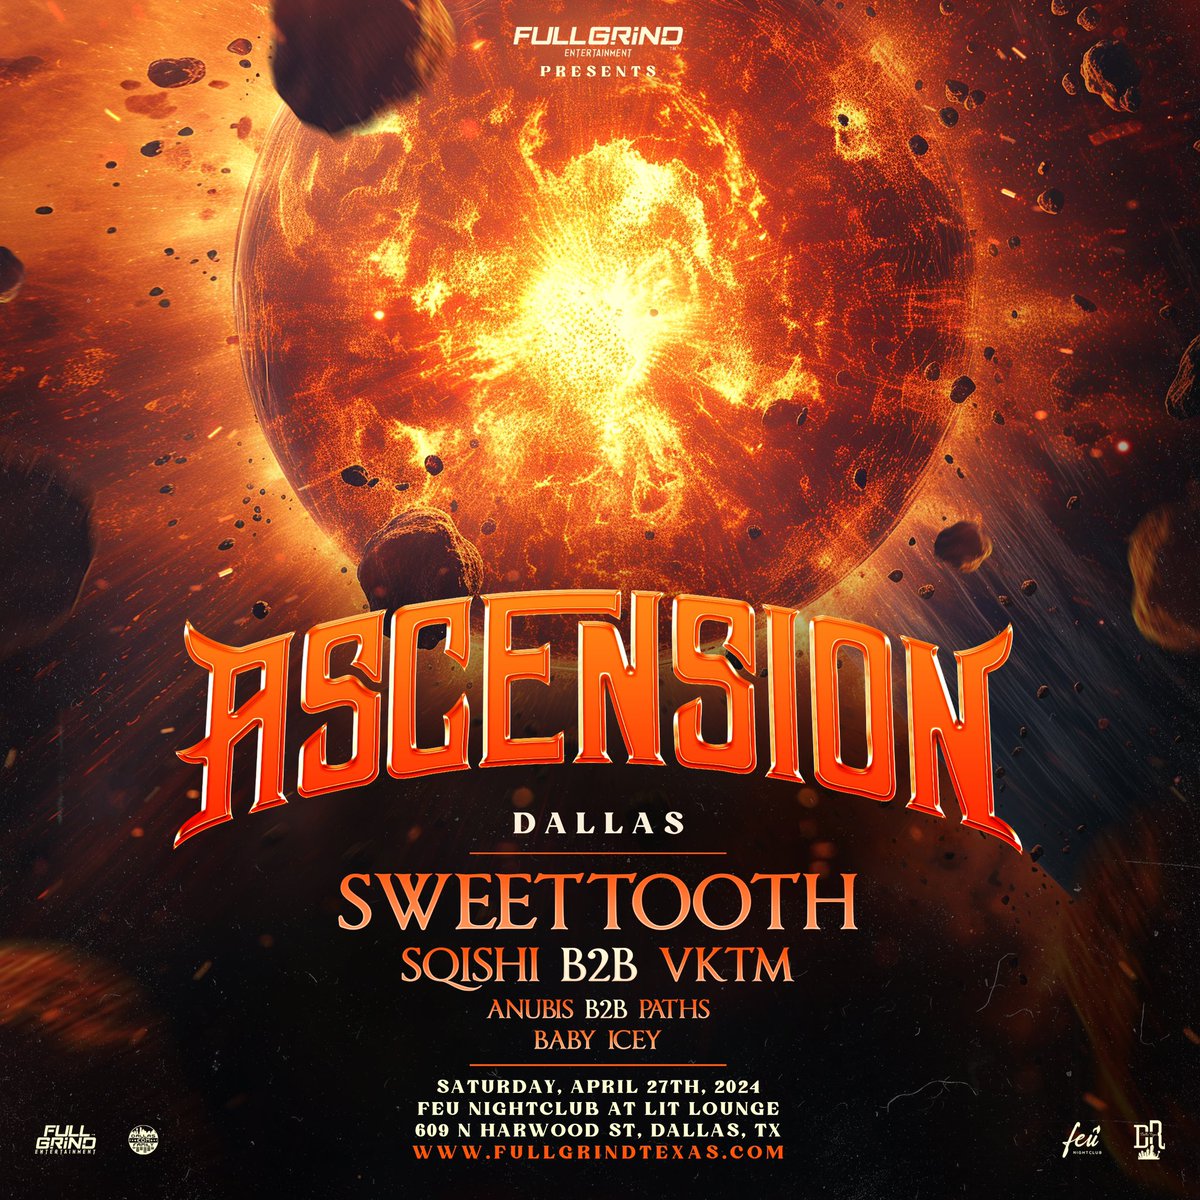 HERE WE GOOOO!! 🚨🚨🚨 THE FIRST ASCENSION EVER IS TONIGHT IN DALLAS WITH NON OTHER THAN #SWEETTOOTH + #SQISHI + #VKTM + #PATHS + #ANUBIS + #BABYICEY + #PHAMOX 🔥🔥🔥 Real riddim sh*t happening tonight 😈